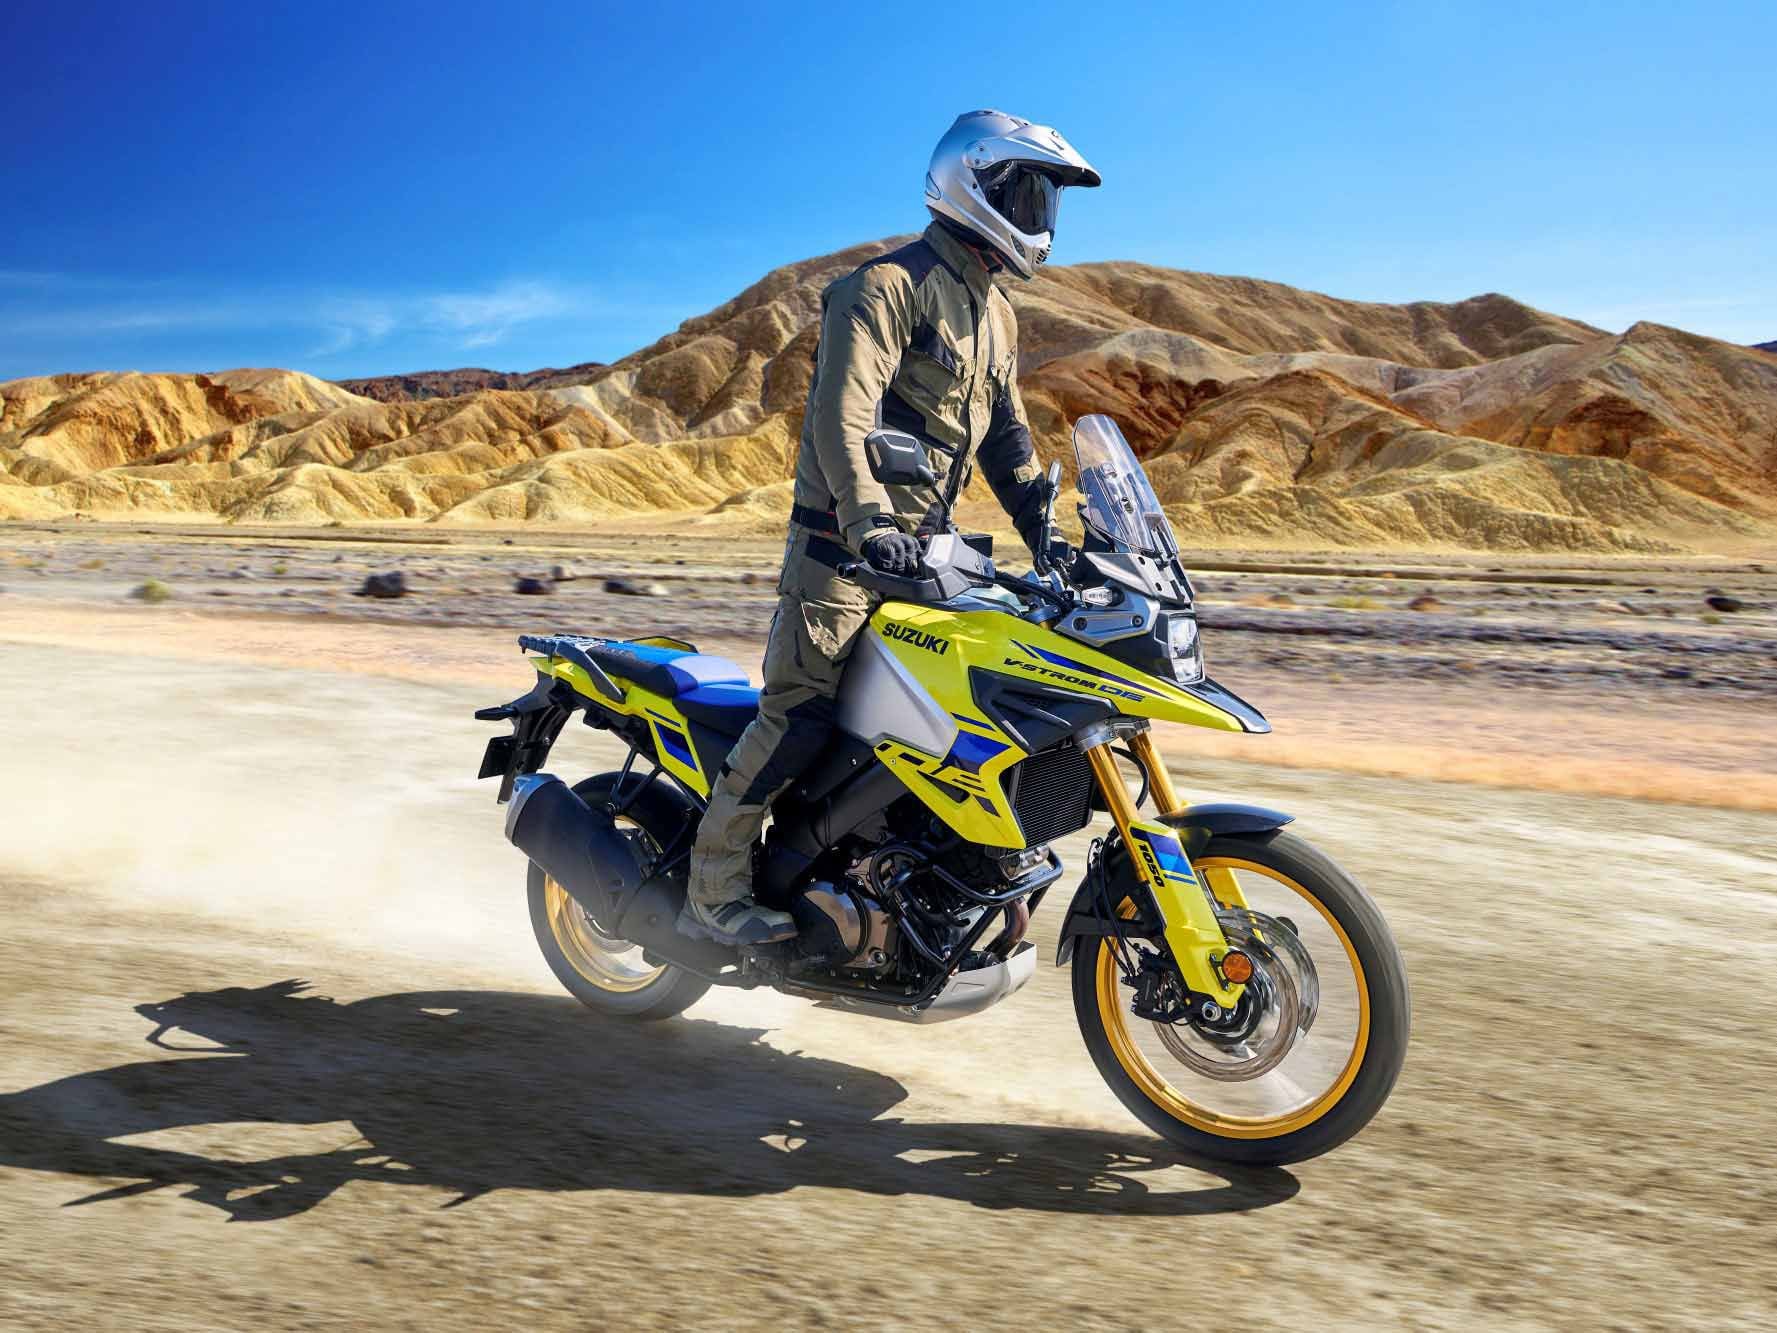 The 1050DE comes standard with a skid plate, crashbars, hand guards, and an up-and-down quickshifter.